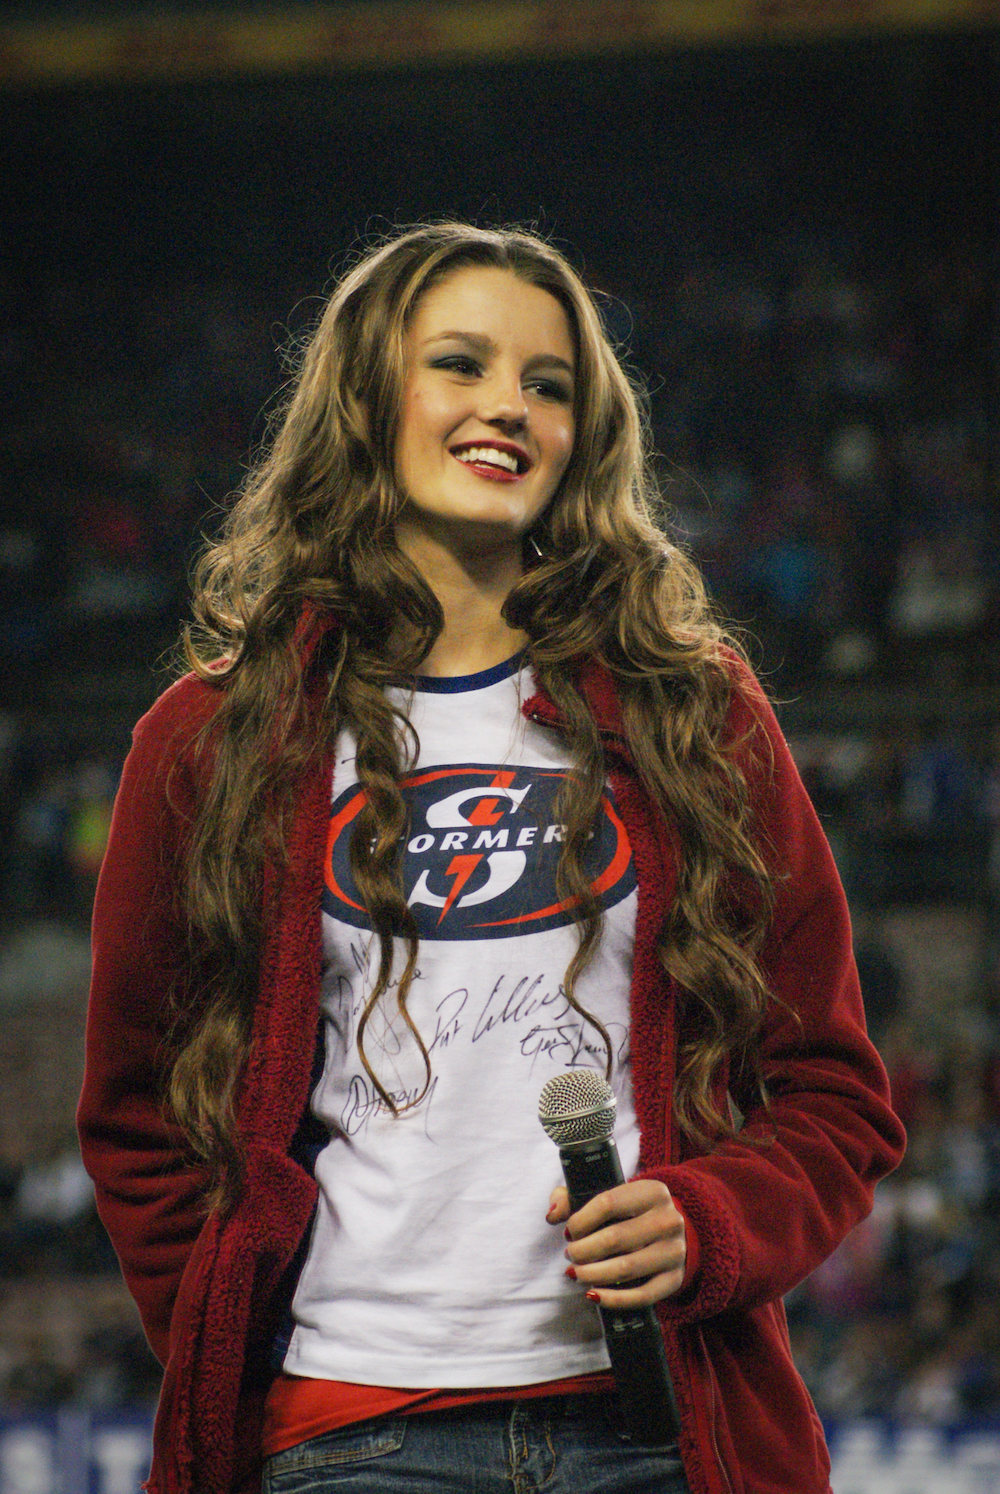 Jenna at stormers game